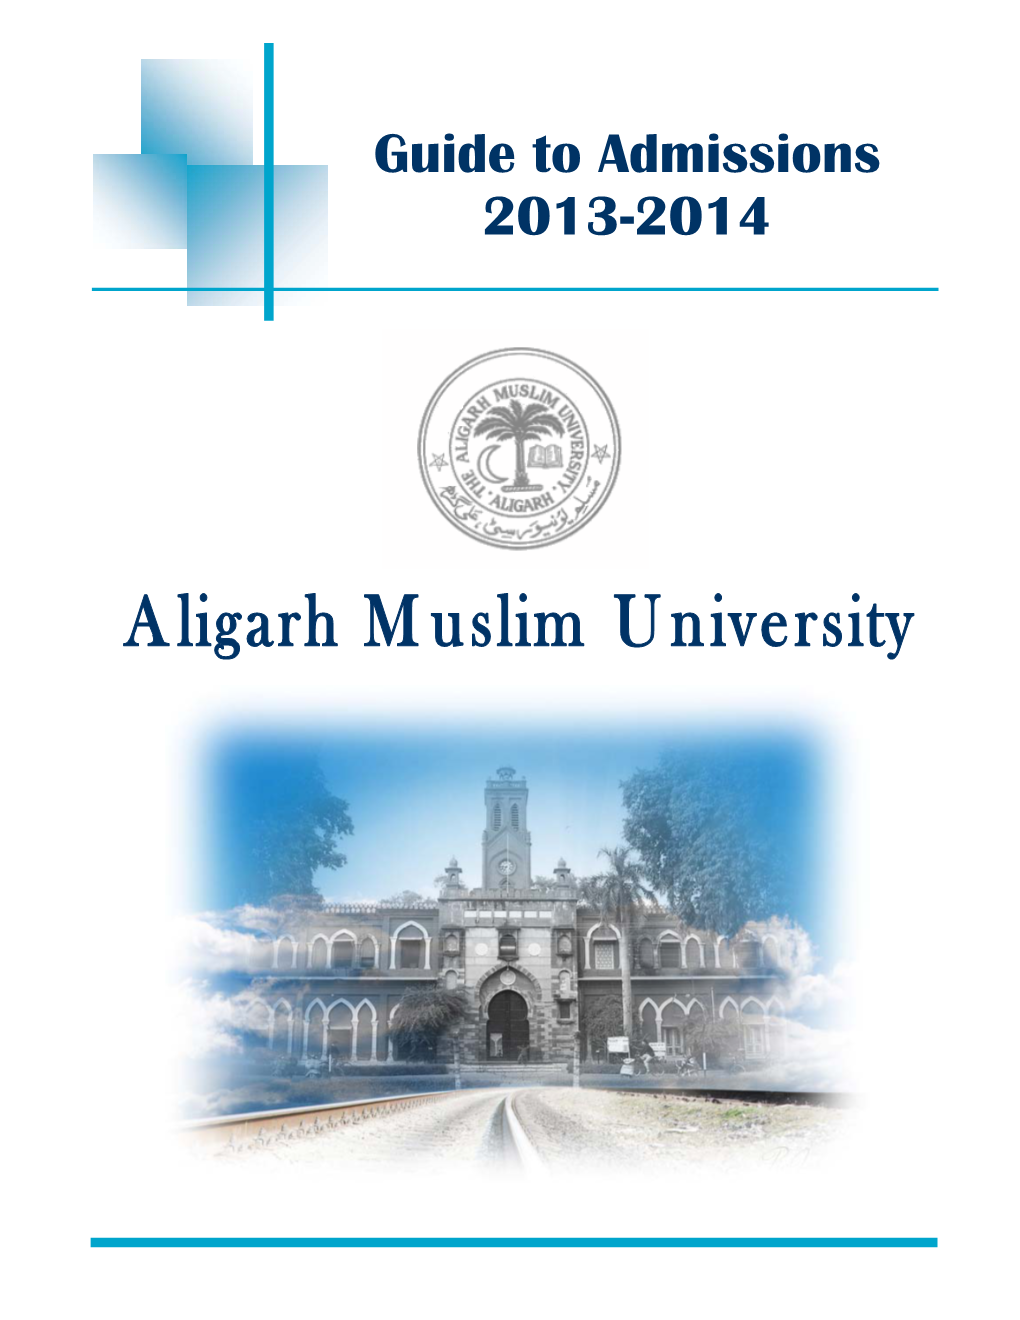 Aligarh Muslim University Guide to Admissions 2013-14